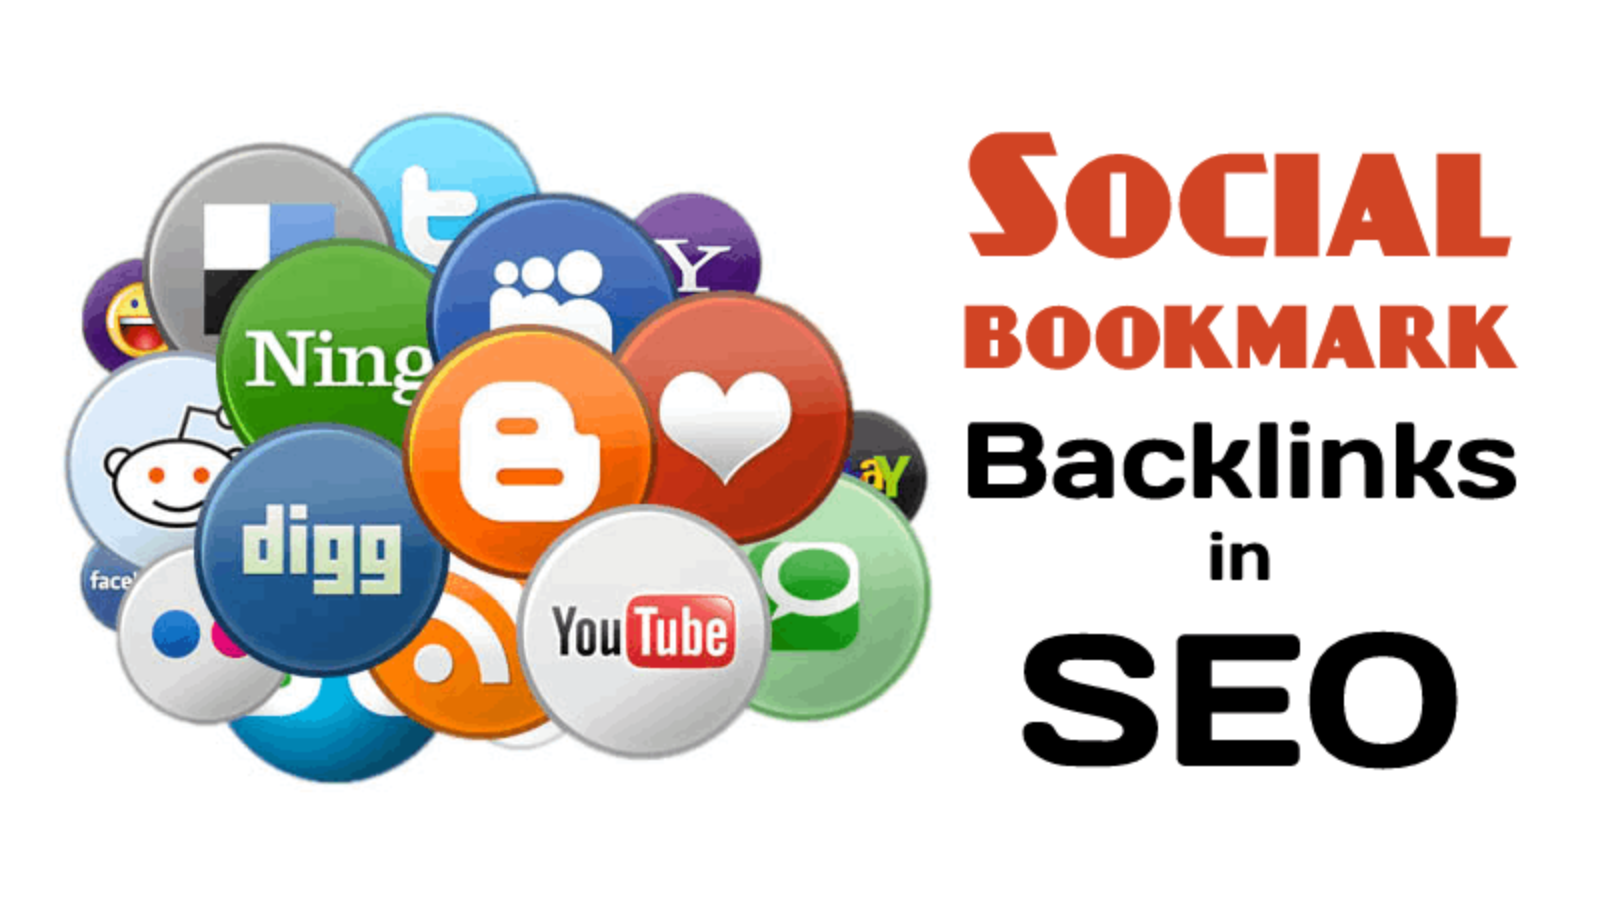 What is Social bookmark and its purpose